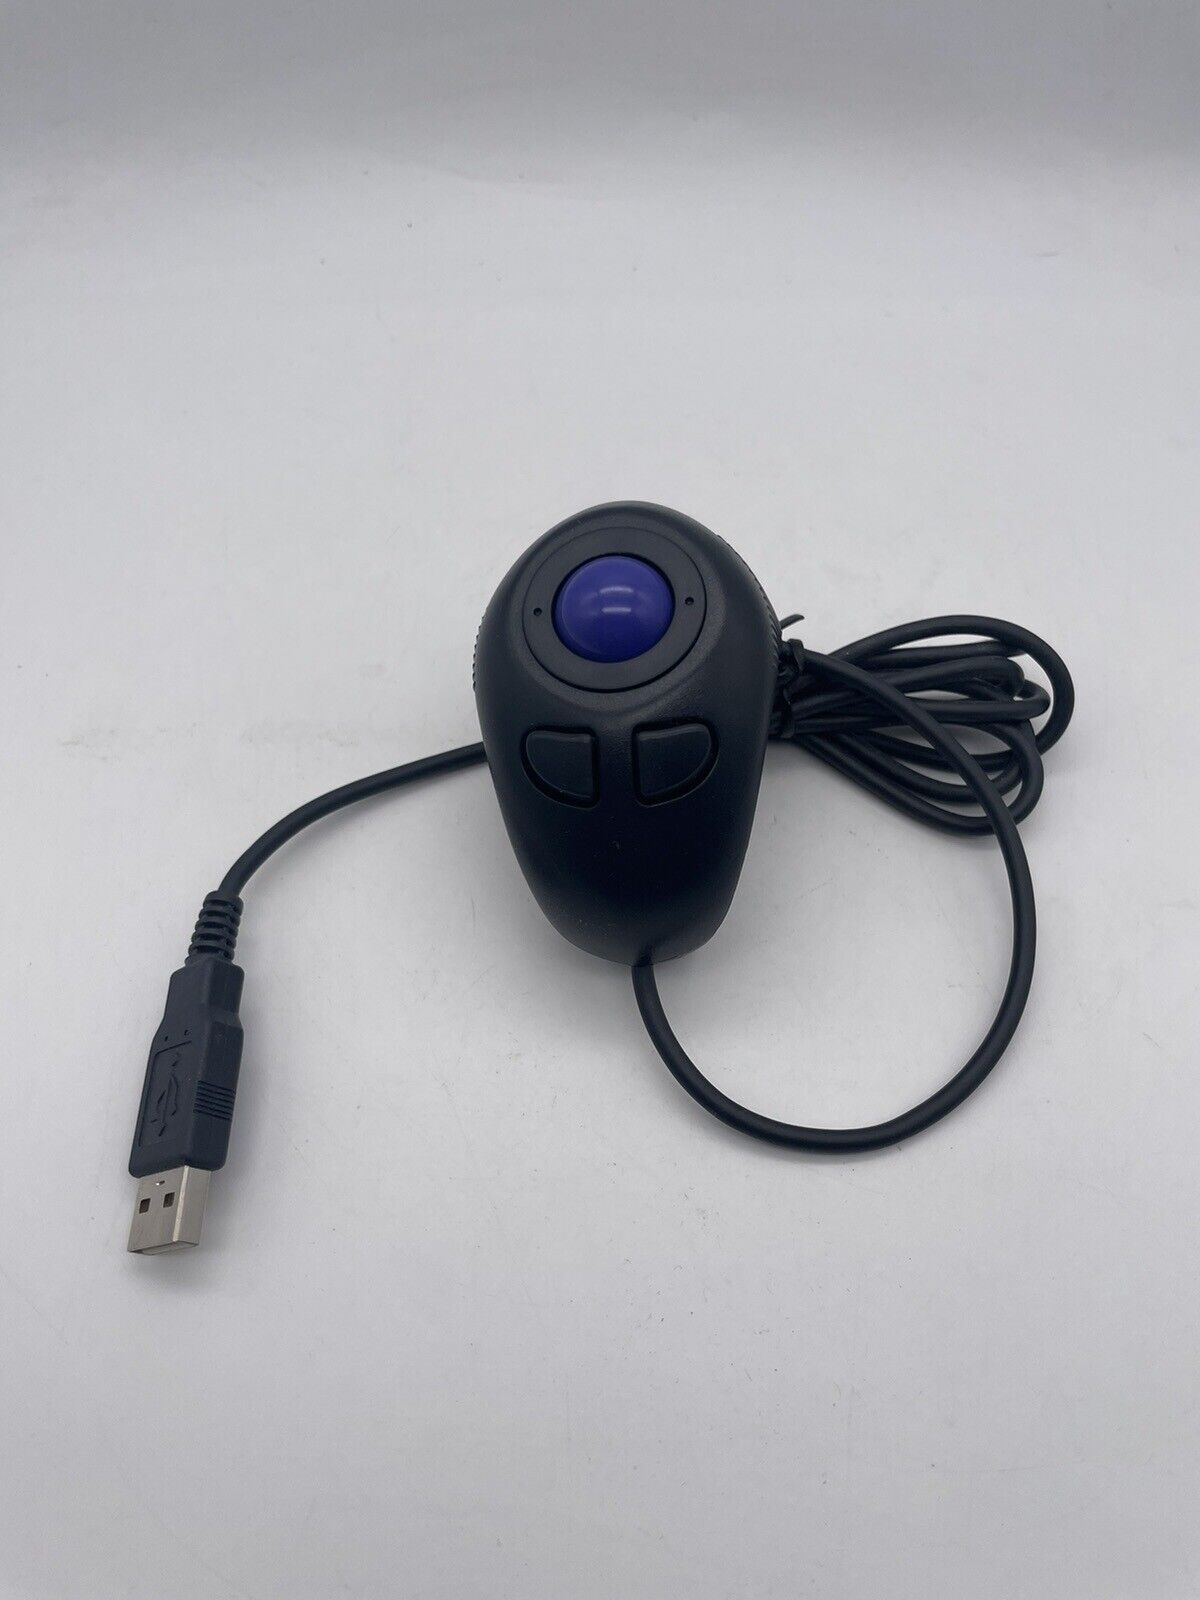 Vintage Small Portable Micro Trackball Wired USB FDM-G51 Handheld Finger Mouse